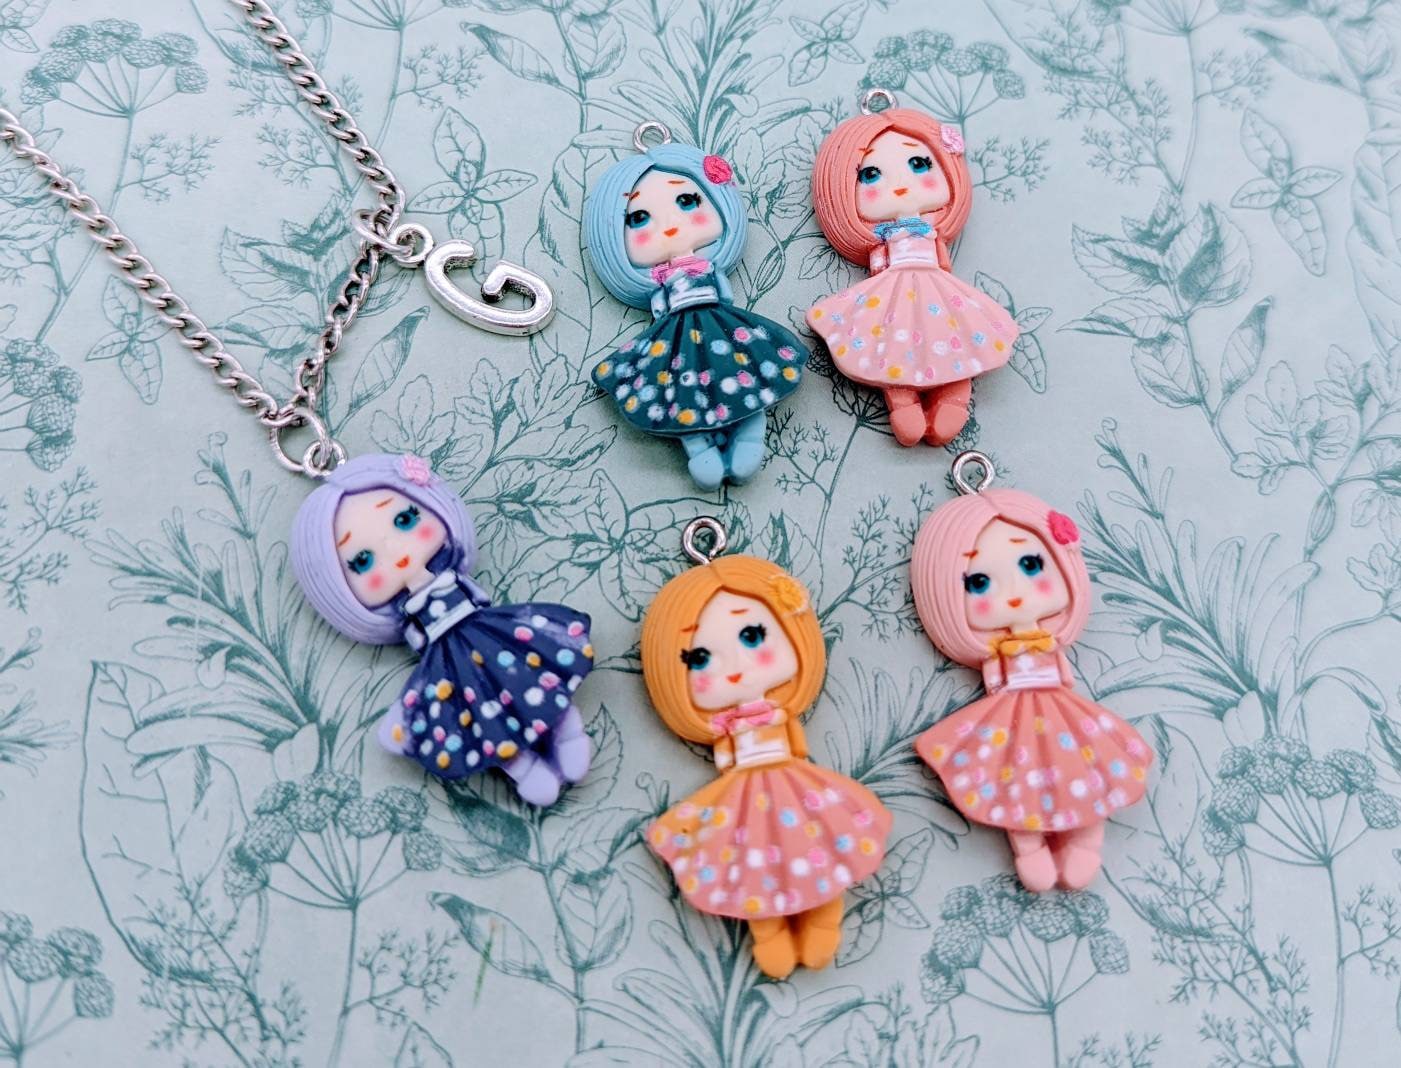 Matching Sanrio Necklaces Set, My Melody and Kuromi, Kawaii Adorable Unique  Gift for Bestfriend/bffs/friendship/couples, Sanrio Girl Gift 